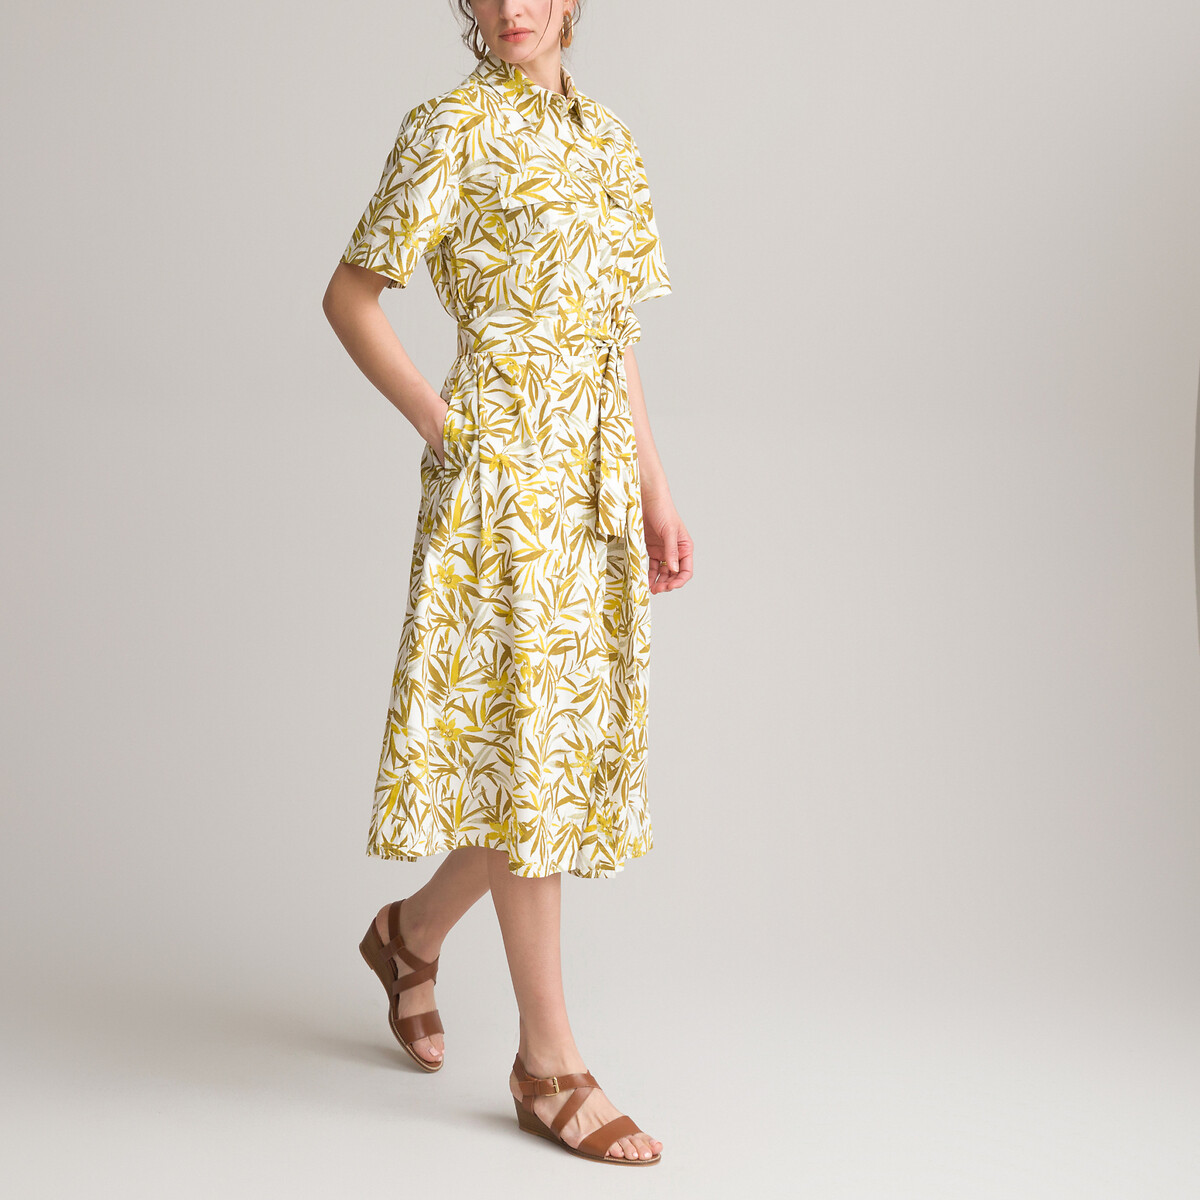 Dresses for Women | Day, Party, Summer Dresses (Page 3) | La Redoute